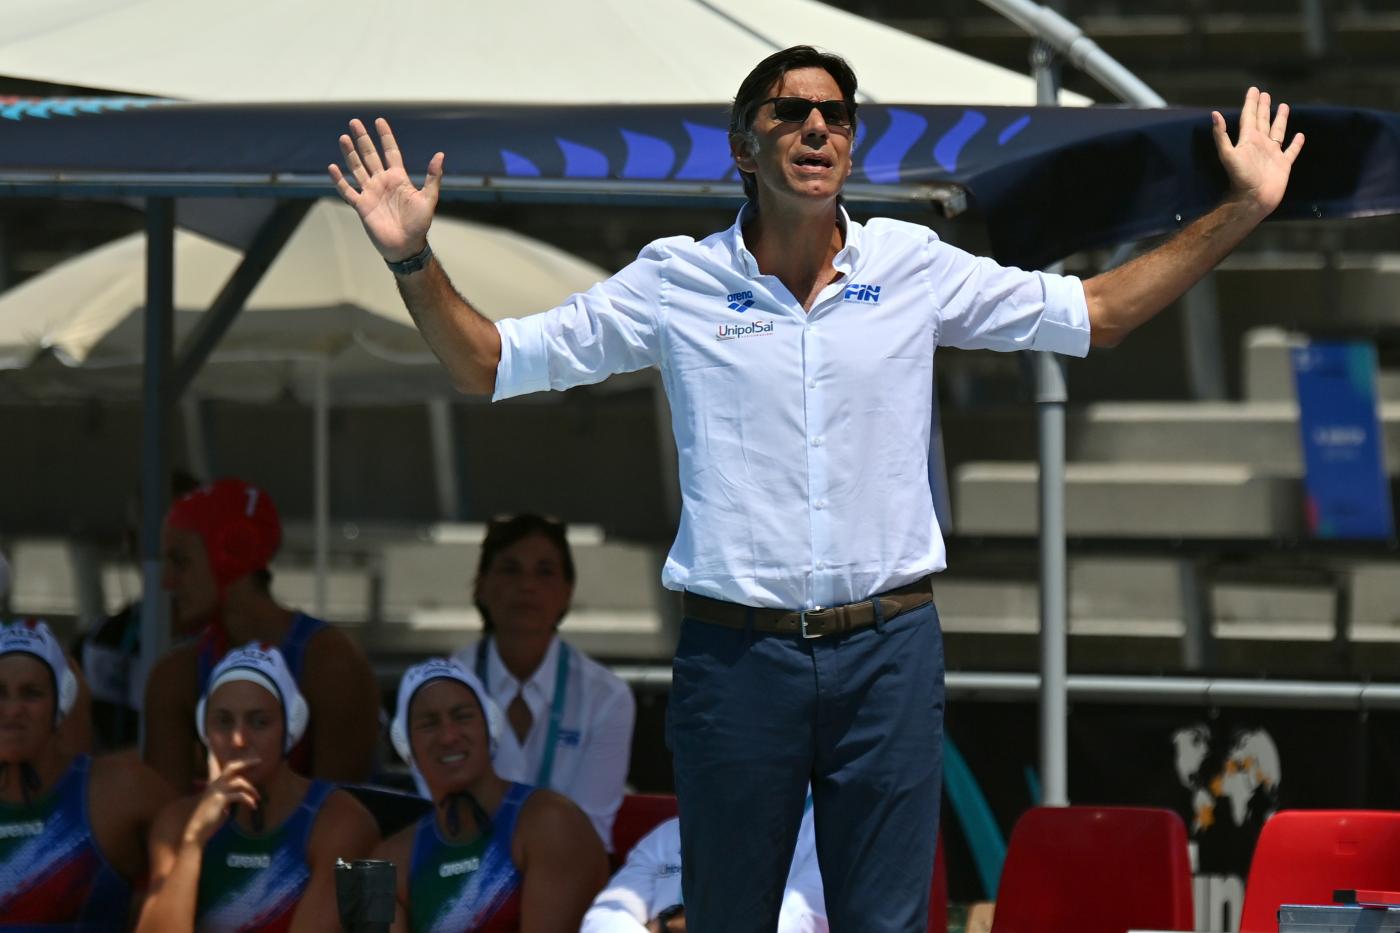 Water polo Carlo Celippo: “I take responsibility for this defeat”